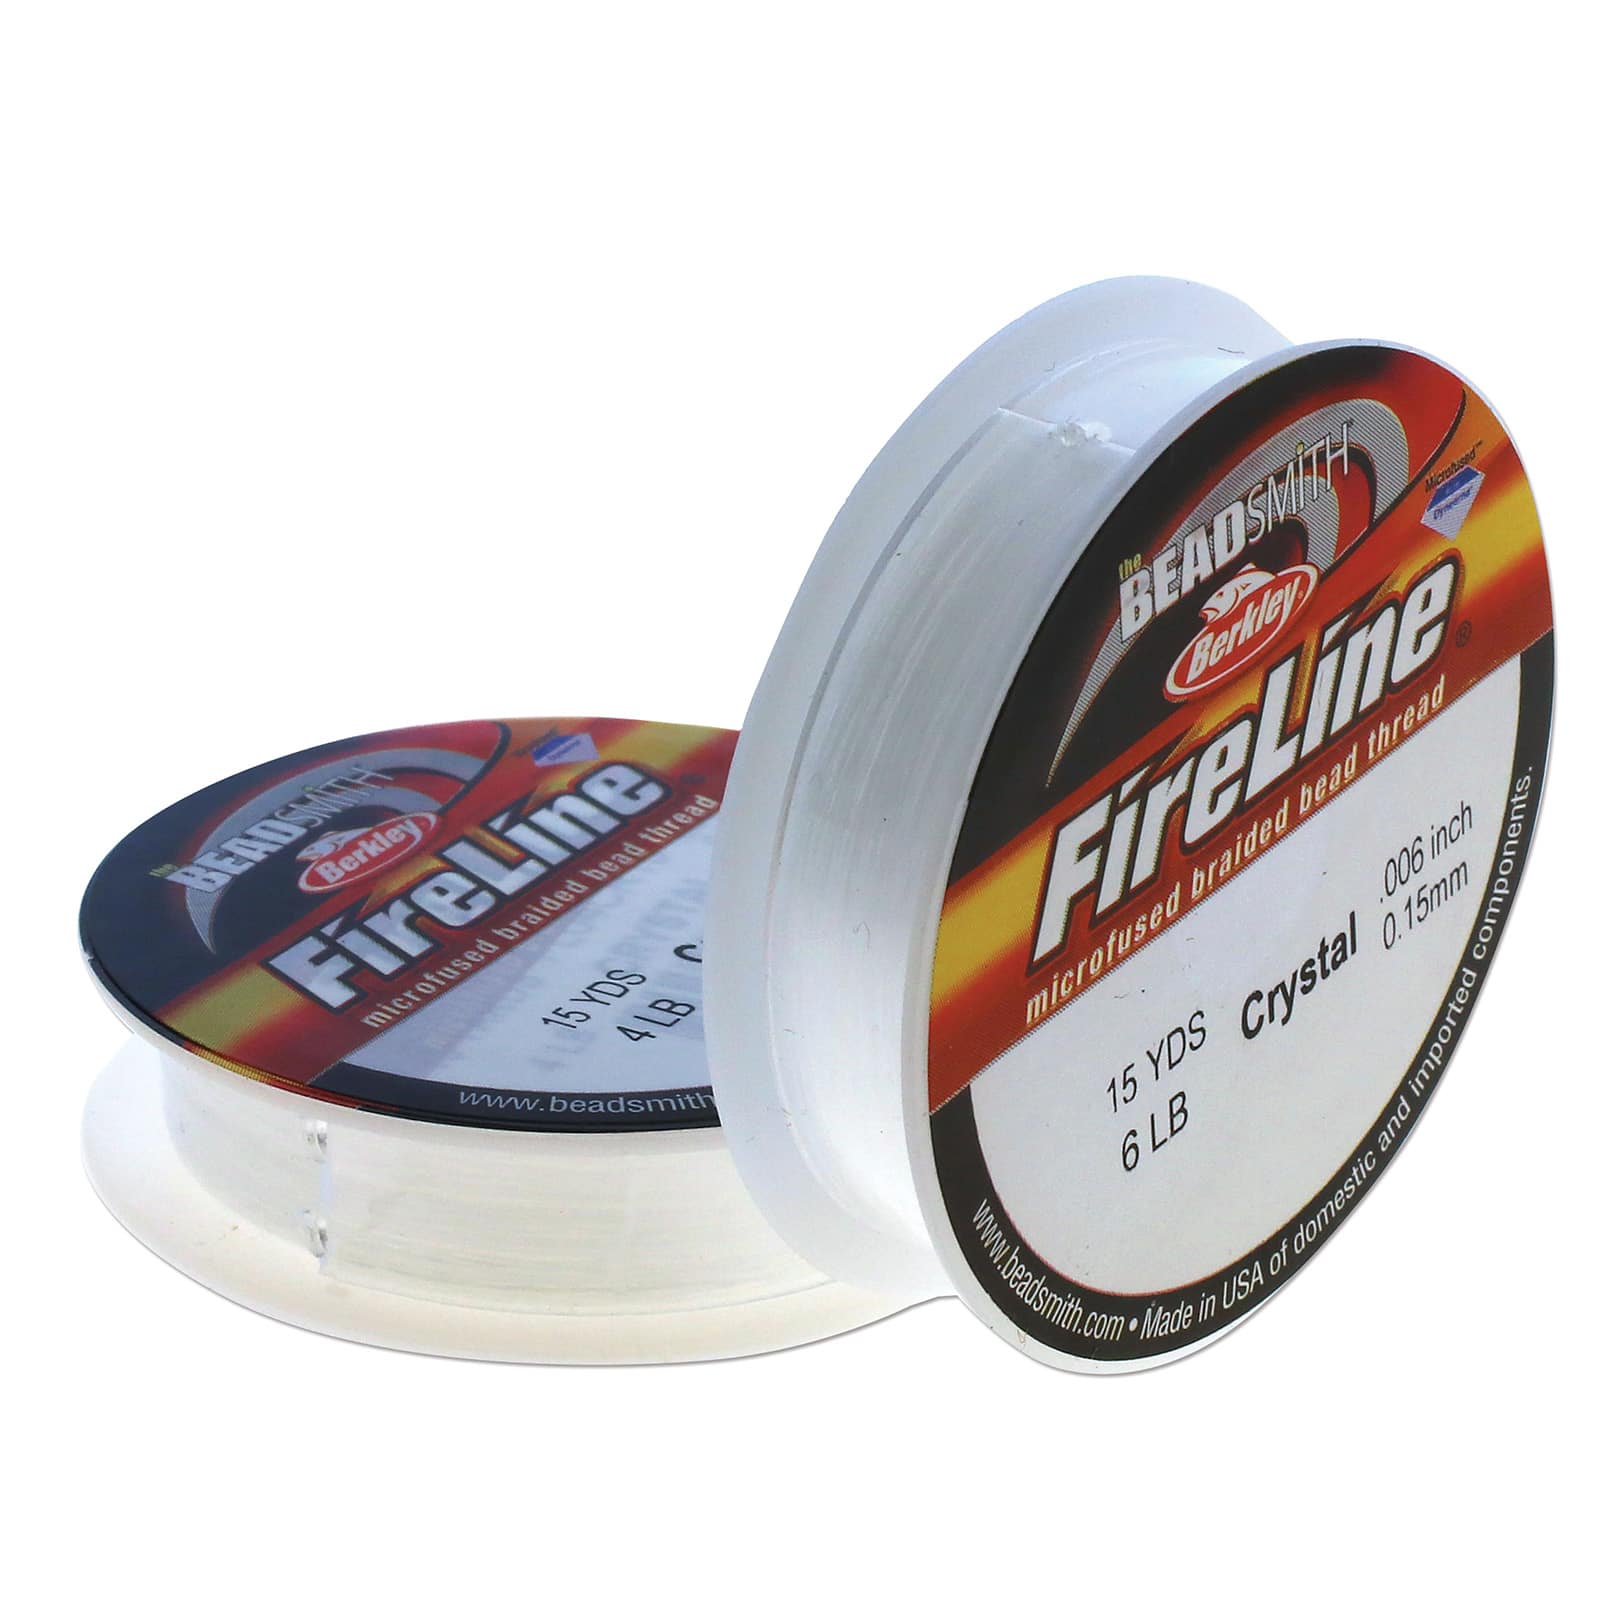 FireLine Braided Beading Thread Pack, 4-6-8lb Test Weights, Three 15 Yard Spools, Smoke Gray, Adult Unisex, Size: One Size